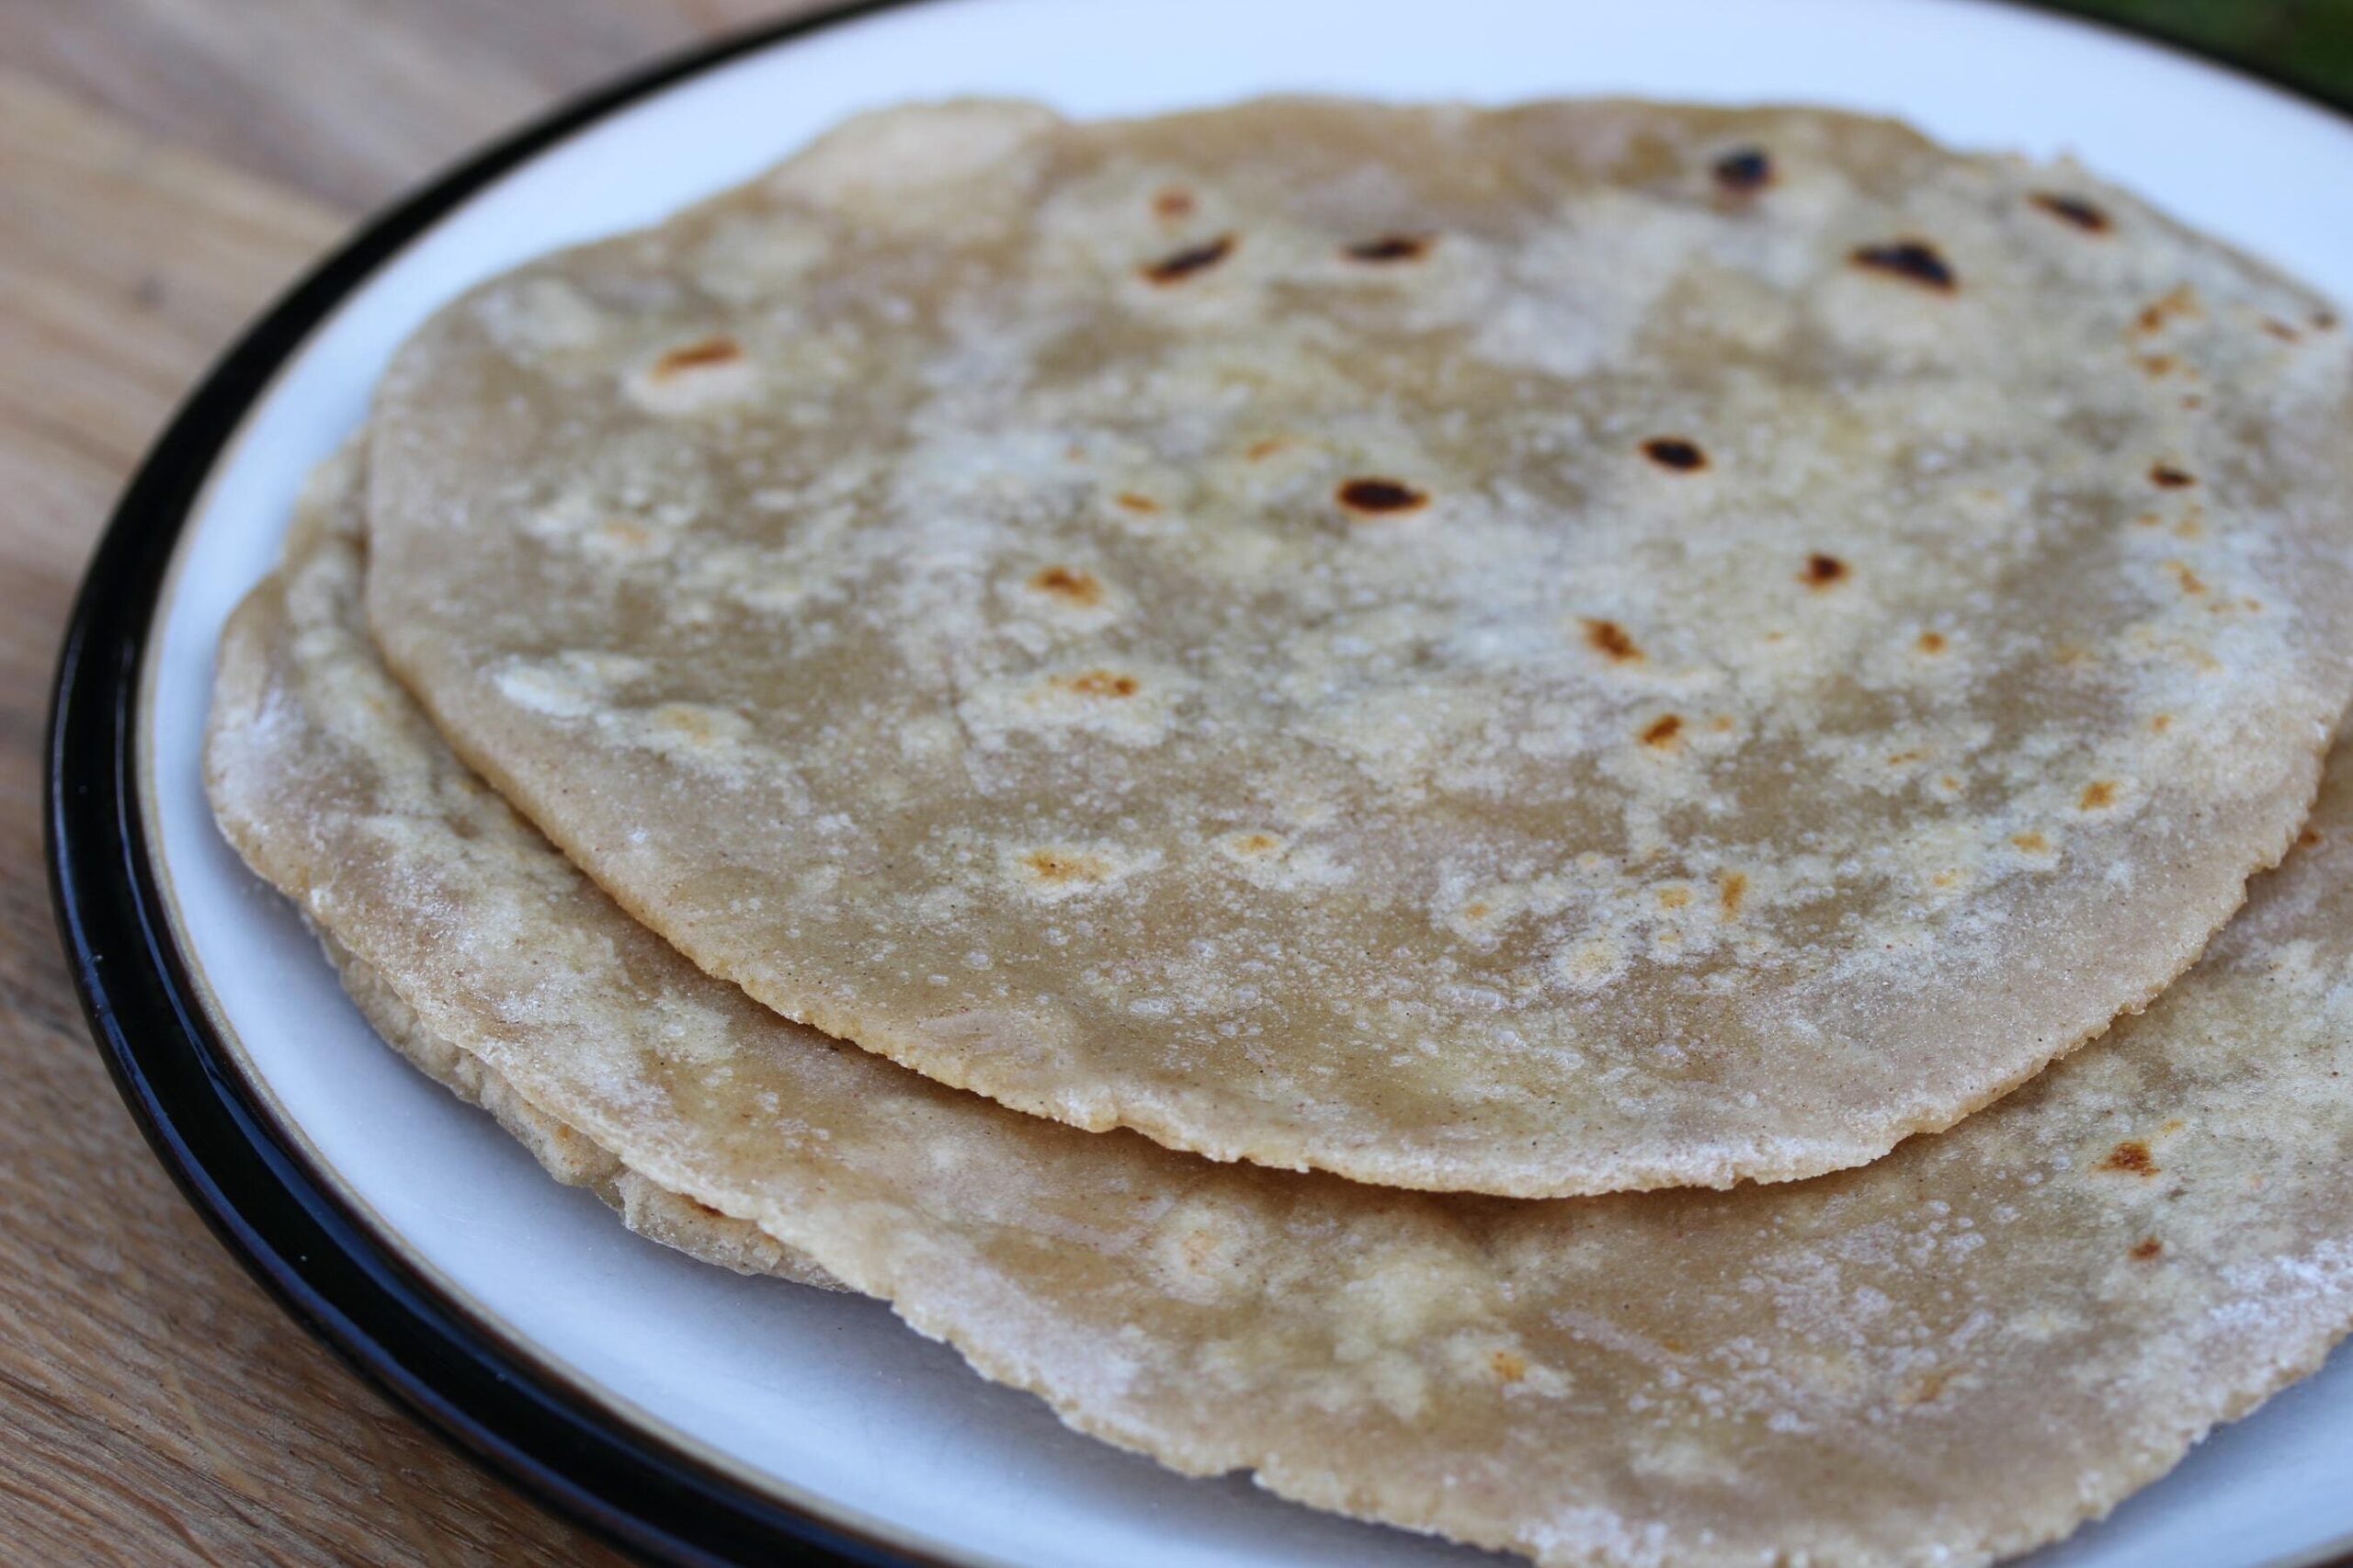  Perfectly flaky gluten-free rotis hot off the griddle.